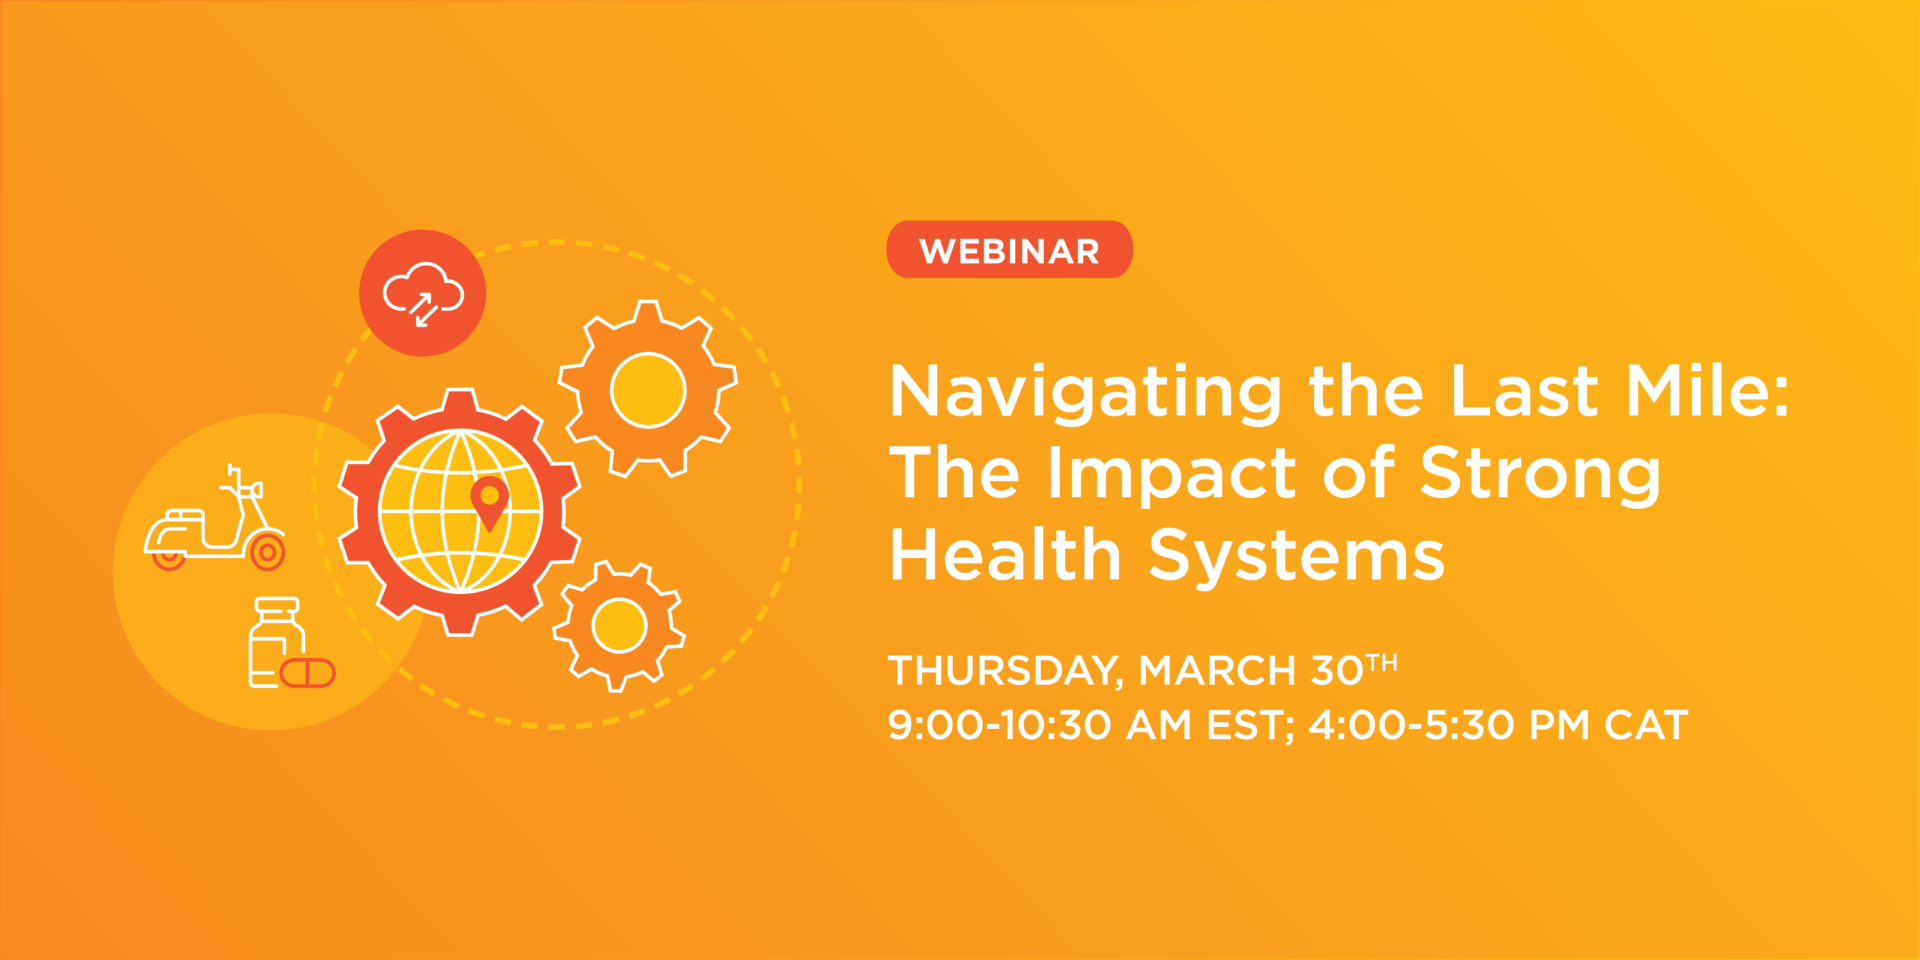 An orange graphic showing several gears, a motorbike, and a bottle of pills with the text "Webinar; Navigating the Last Mile: The Impact of Strong Health Systems."